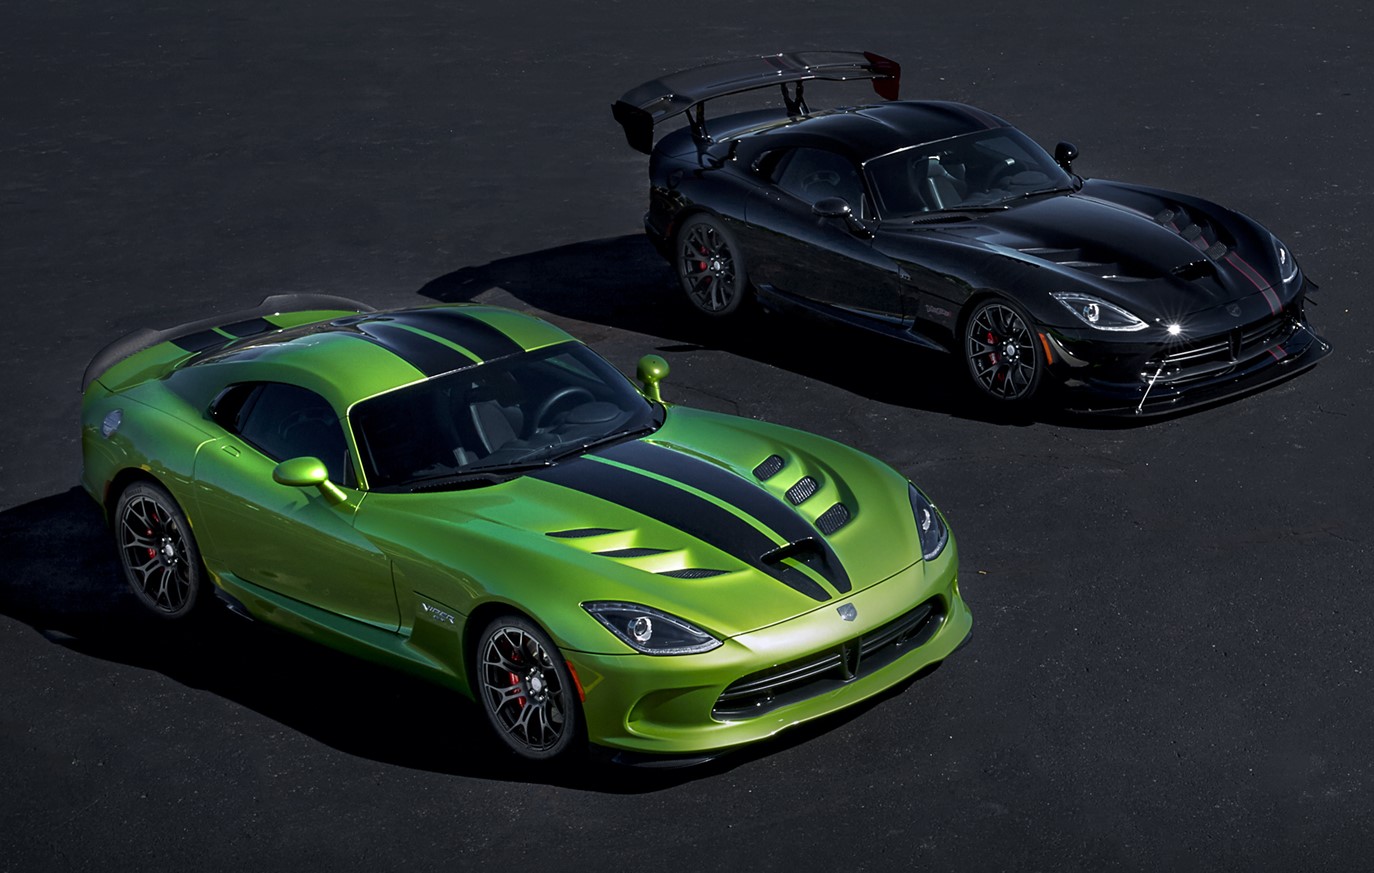 Dodge is celebrating the 25th anniversary and final year of Viper production with five exclusive limited-edition models, four of which are pictured here. (From left, the Viper Snakeskin Edition GTC, inspired by the original 2010 Snakeskin ACR; the Vooodoo II ACR, modeled after the original 2010 Viper VooDoo edition; the Viper GTS-R Commemorative Edition ACR, designed to pay tribute to one of the most distinguishable and iconic Viper paint schemes of all time – the white and blue combination of the 1998 Viper GTS-R GT2 Championship Edition;  and the Viper 1:28 ACR, which pays tribute to the current production car single lap record of 1:28.65 set by champion driver Randy Pobst in a 2016 Dodge Viper ACR at historic Laguna Seca Raceway in Monterey, Calif., in October 2015. A fifth Dodge Dealer Edition Viper ACR, not shown, is available through select Dodge dealers.